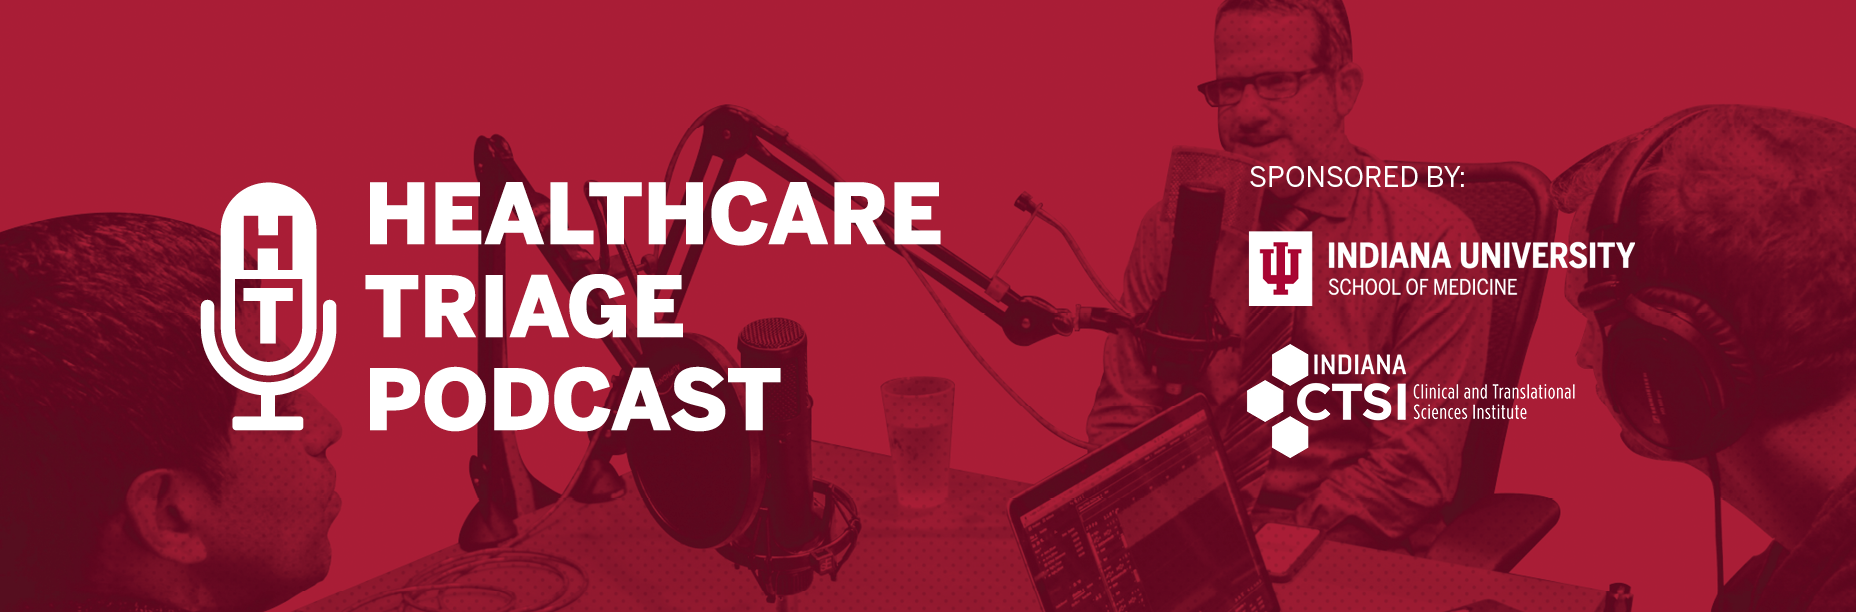 Healthcare Triage Podcast Banner